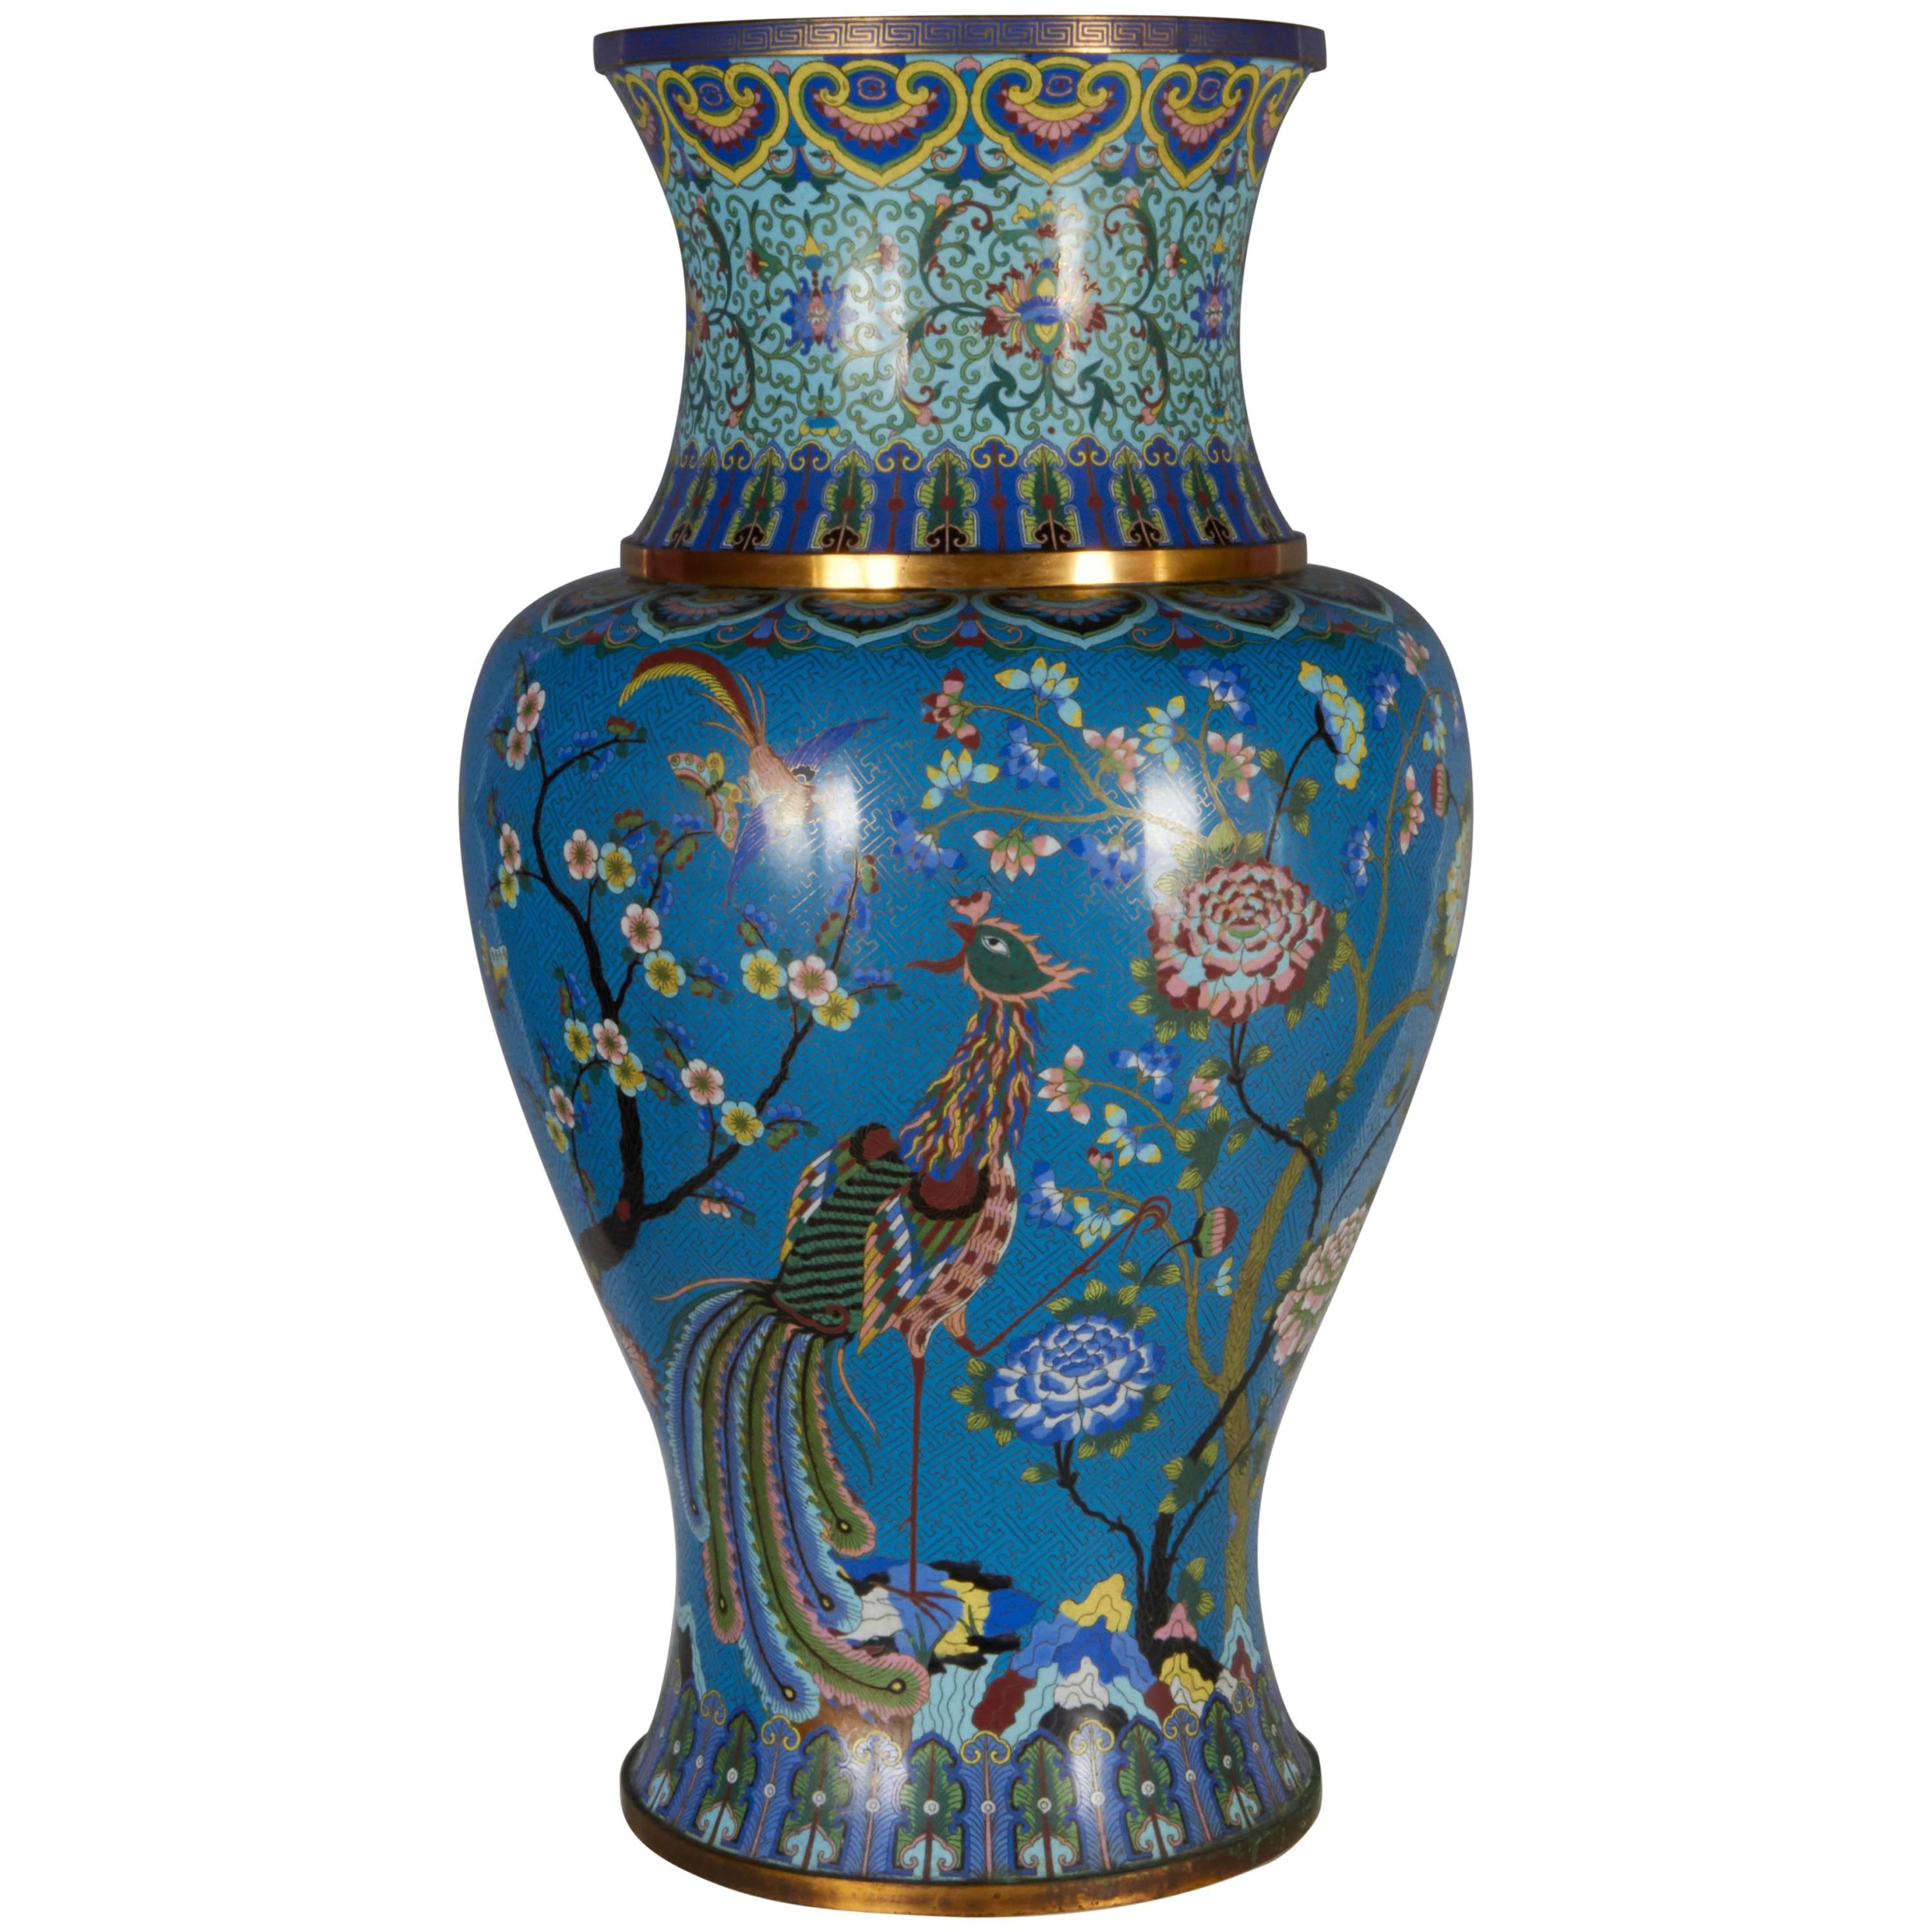 Massive Chinese Cloisonné Vase with Phoenix, Magnolia, Lotus and Chrysanthemums